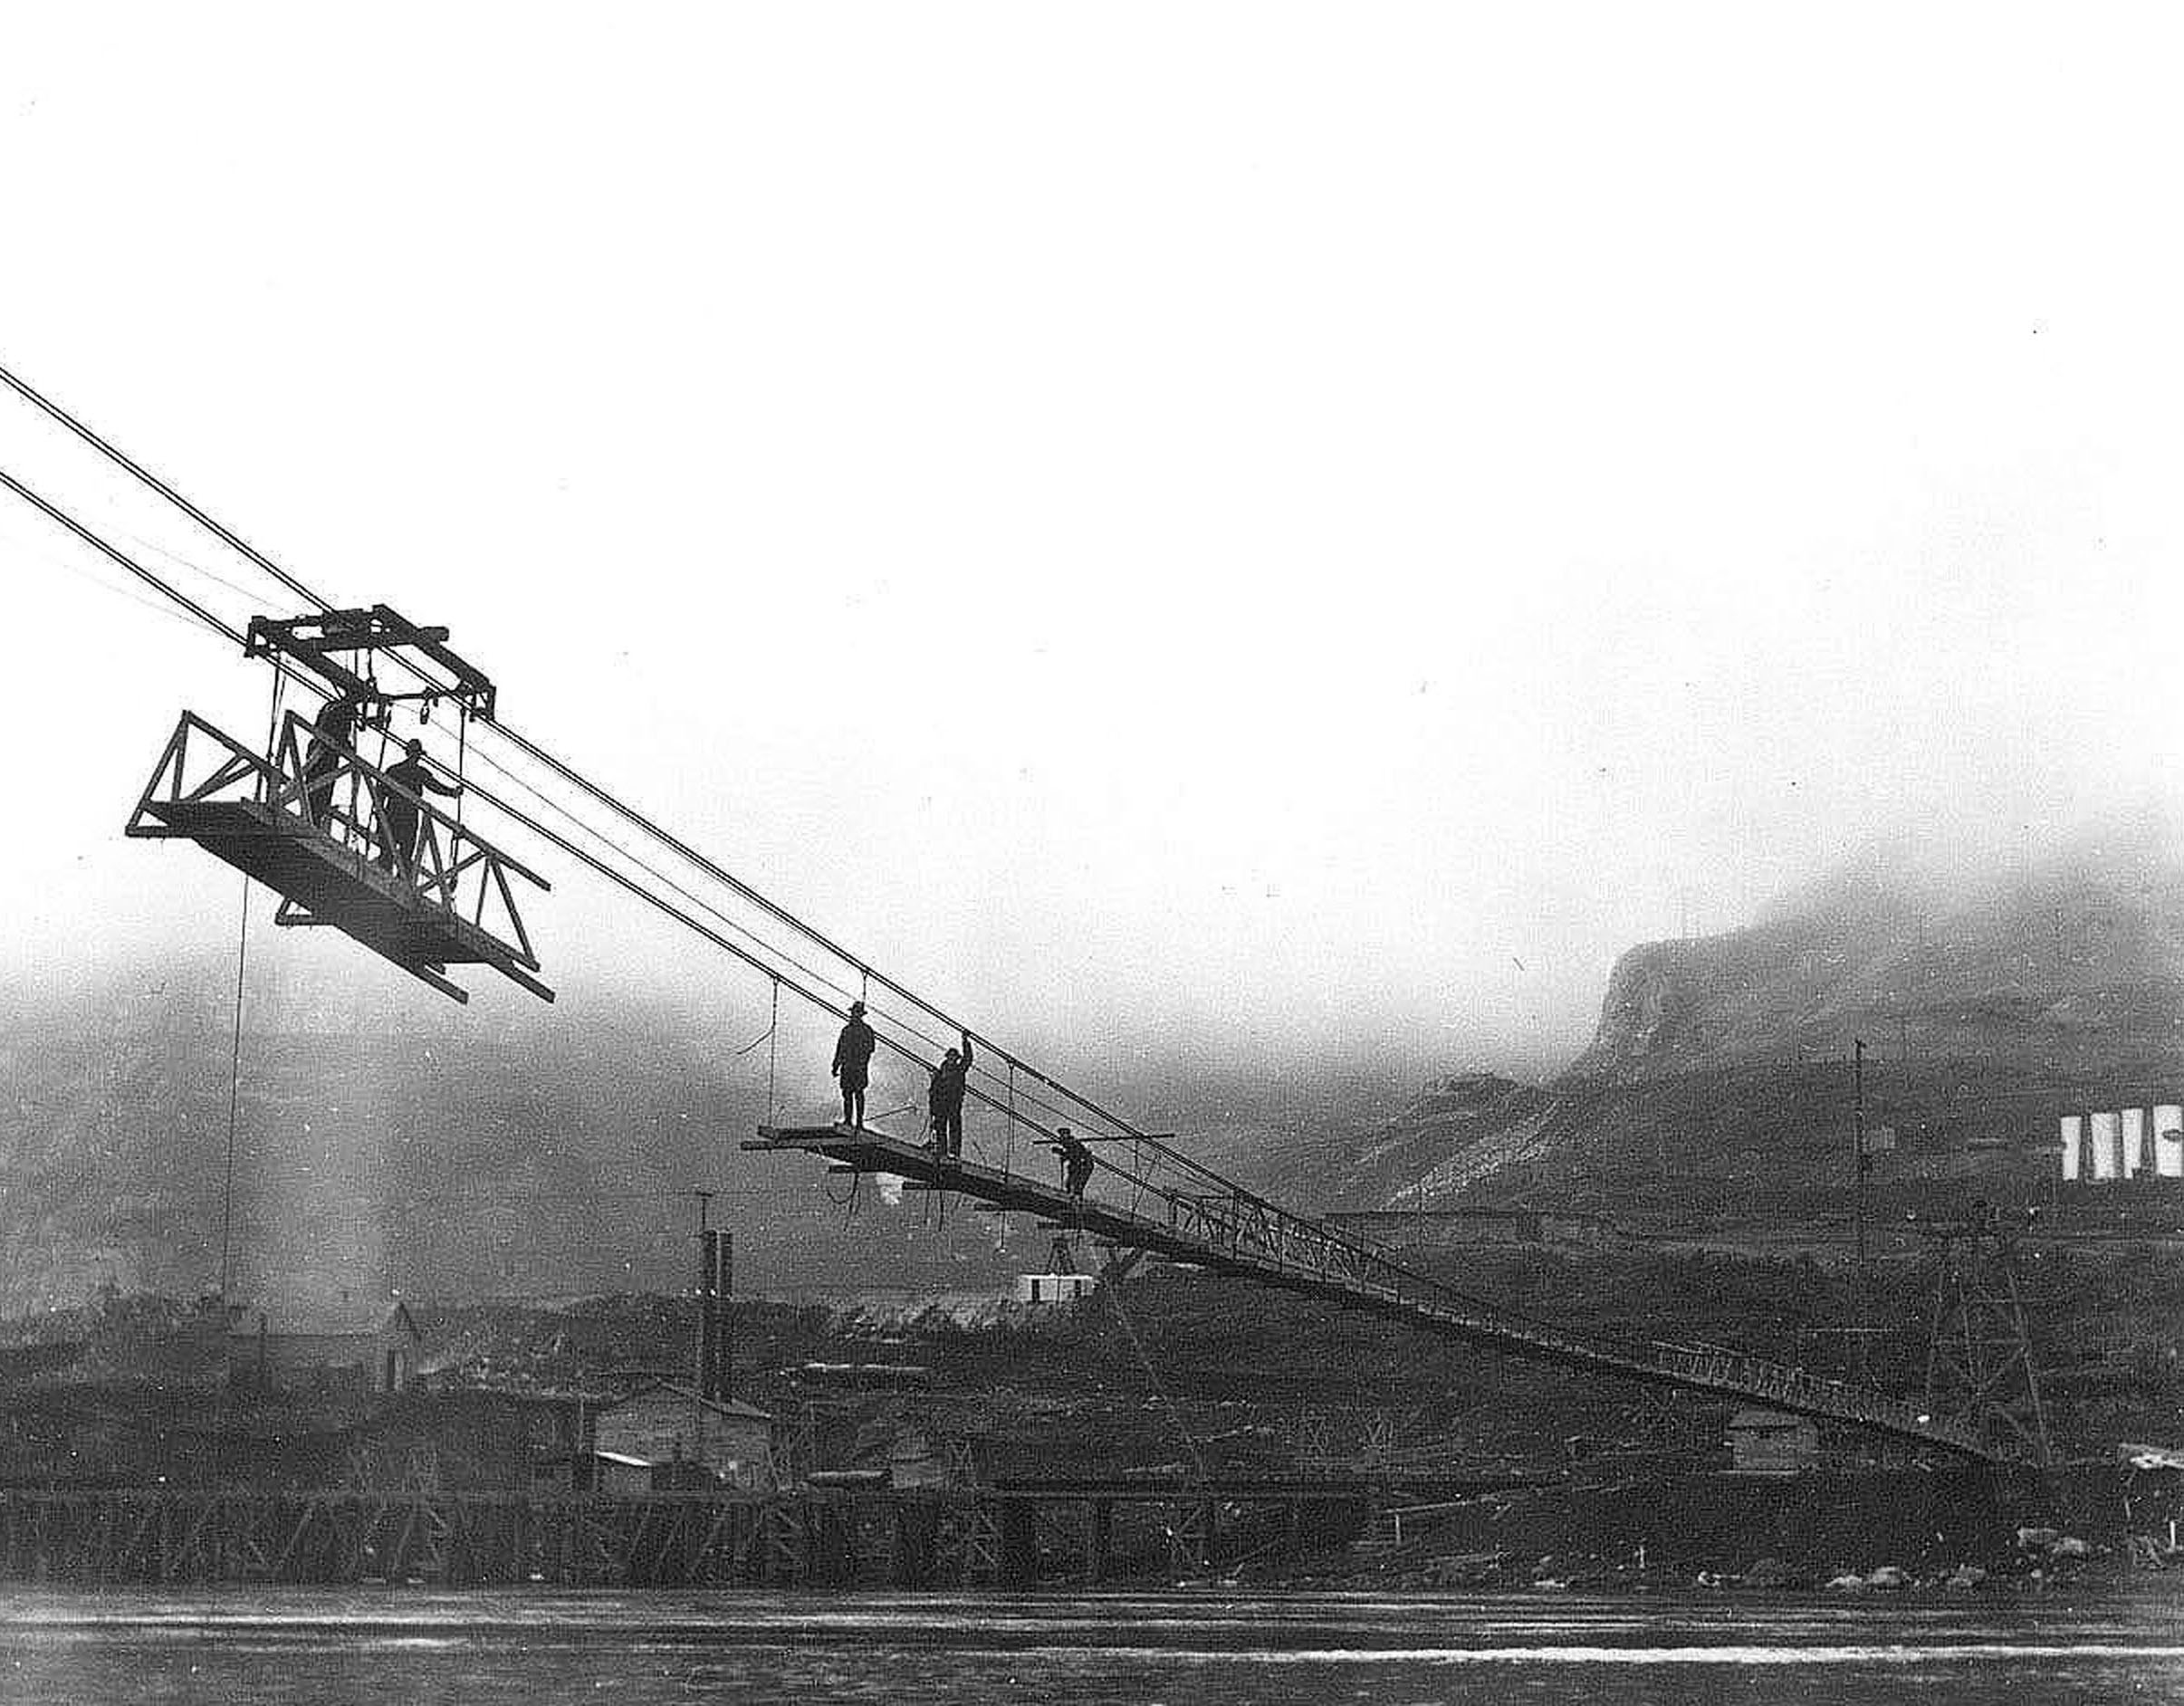 Photo taken February 1935. Contractors catwalk being built so workers could cross the Columbia River at the Grand Coulee damsite.